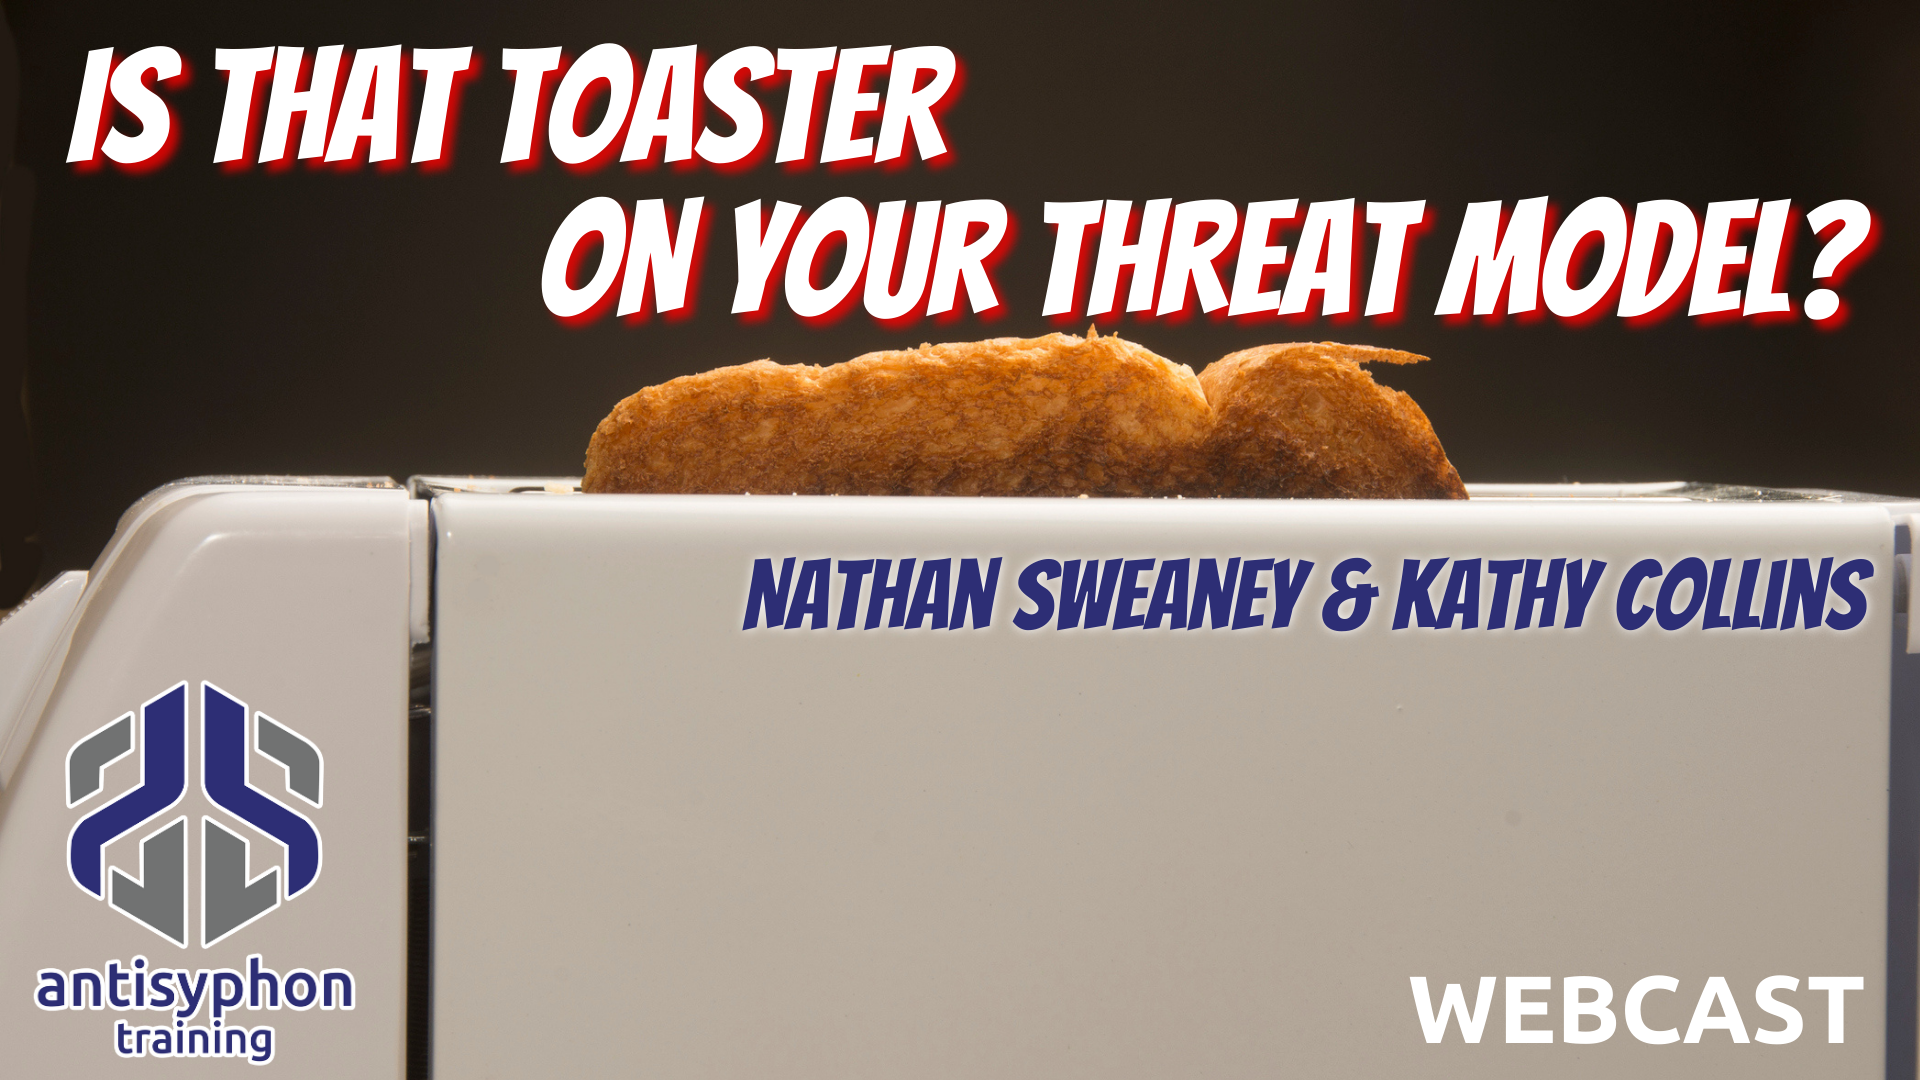 Next Anti-cast – Is That Toaster on Your Threat Model?